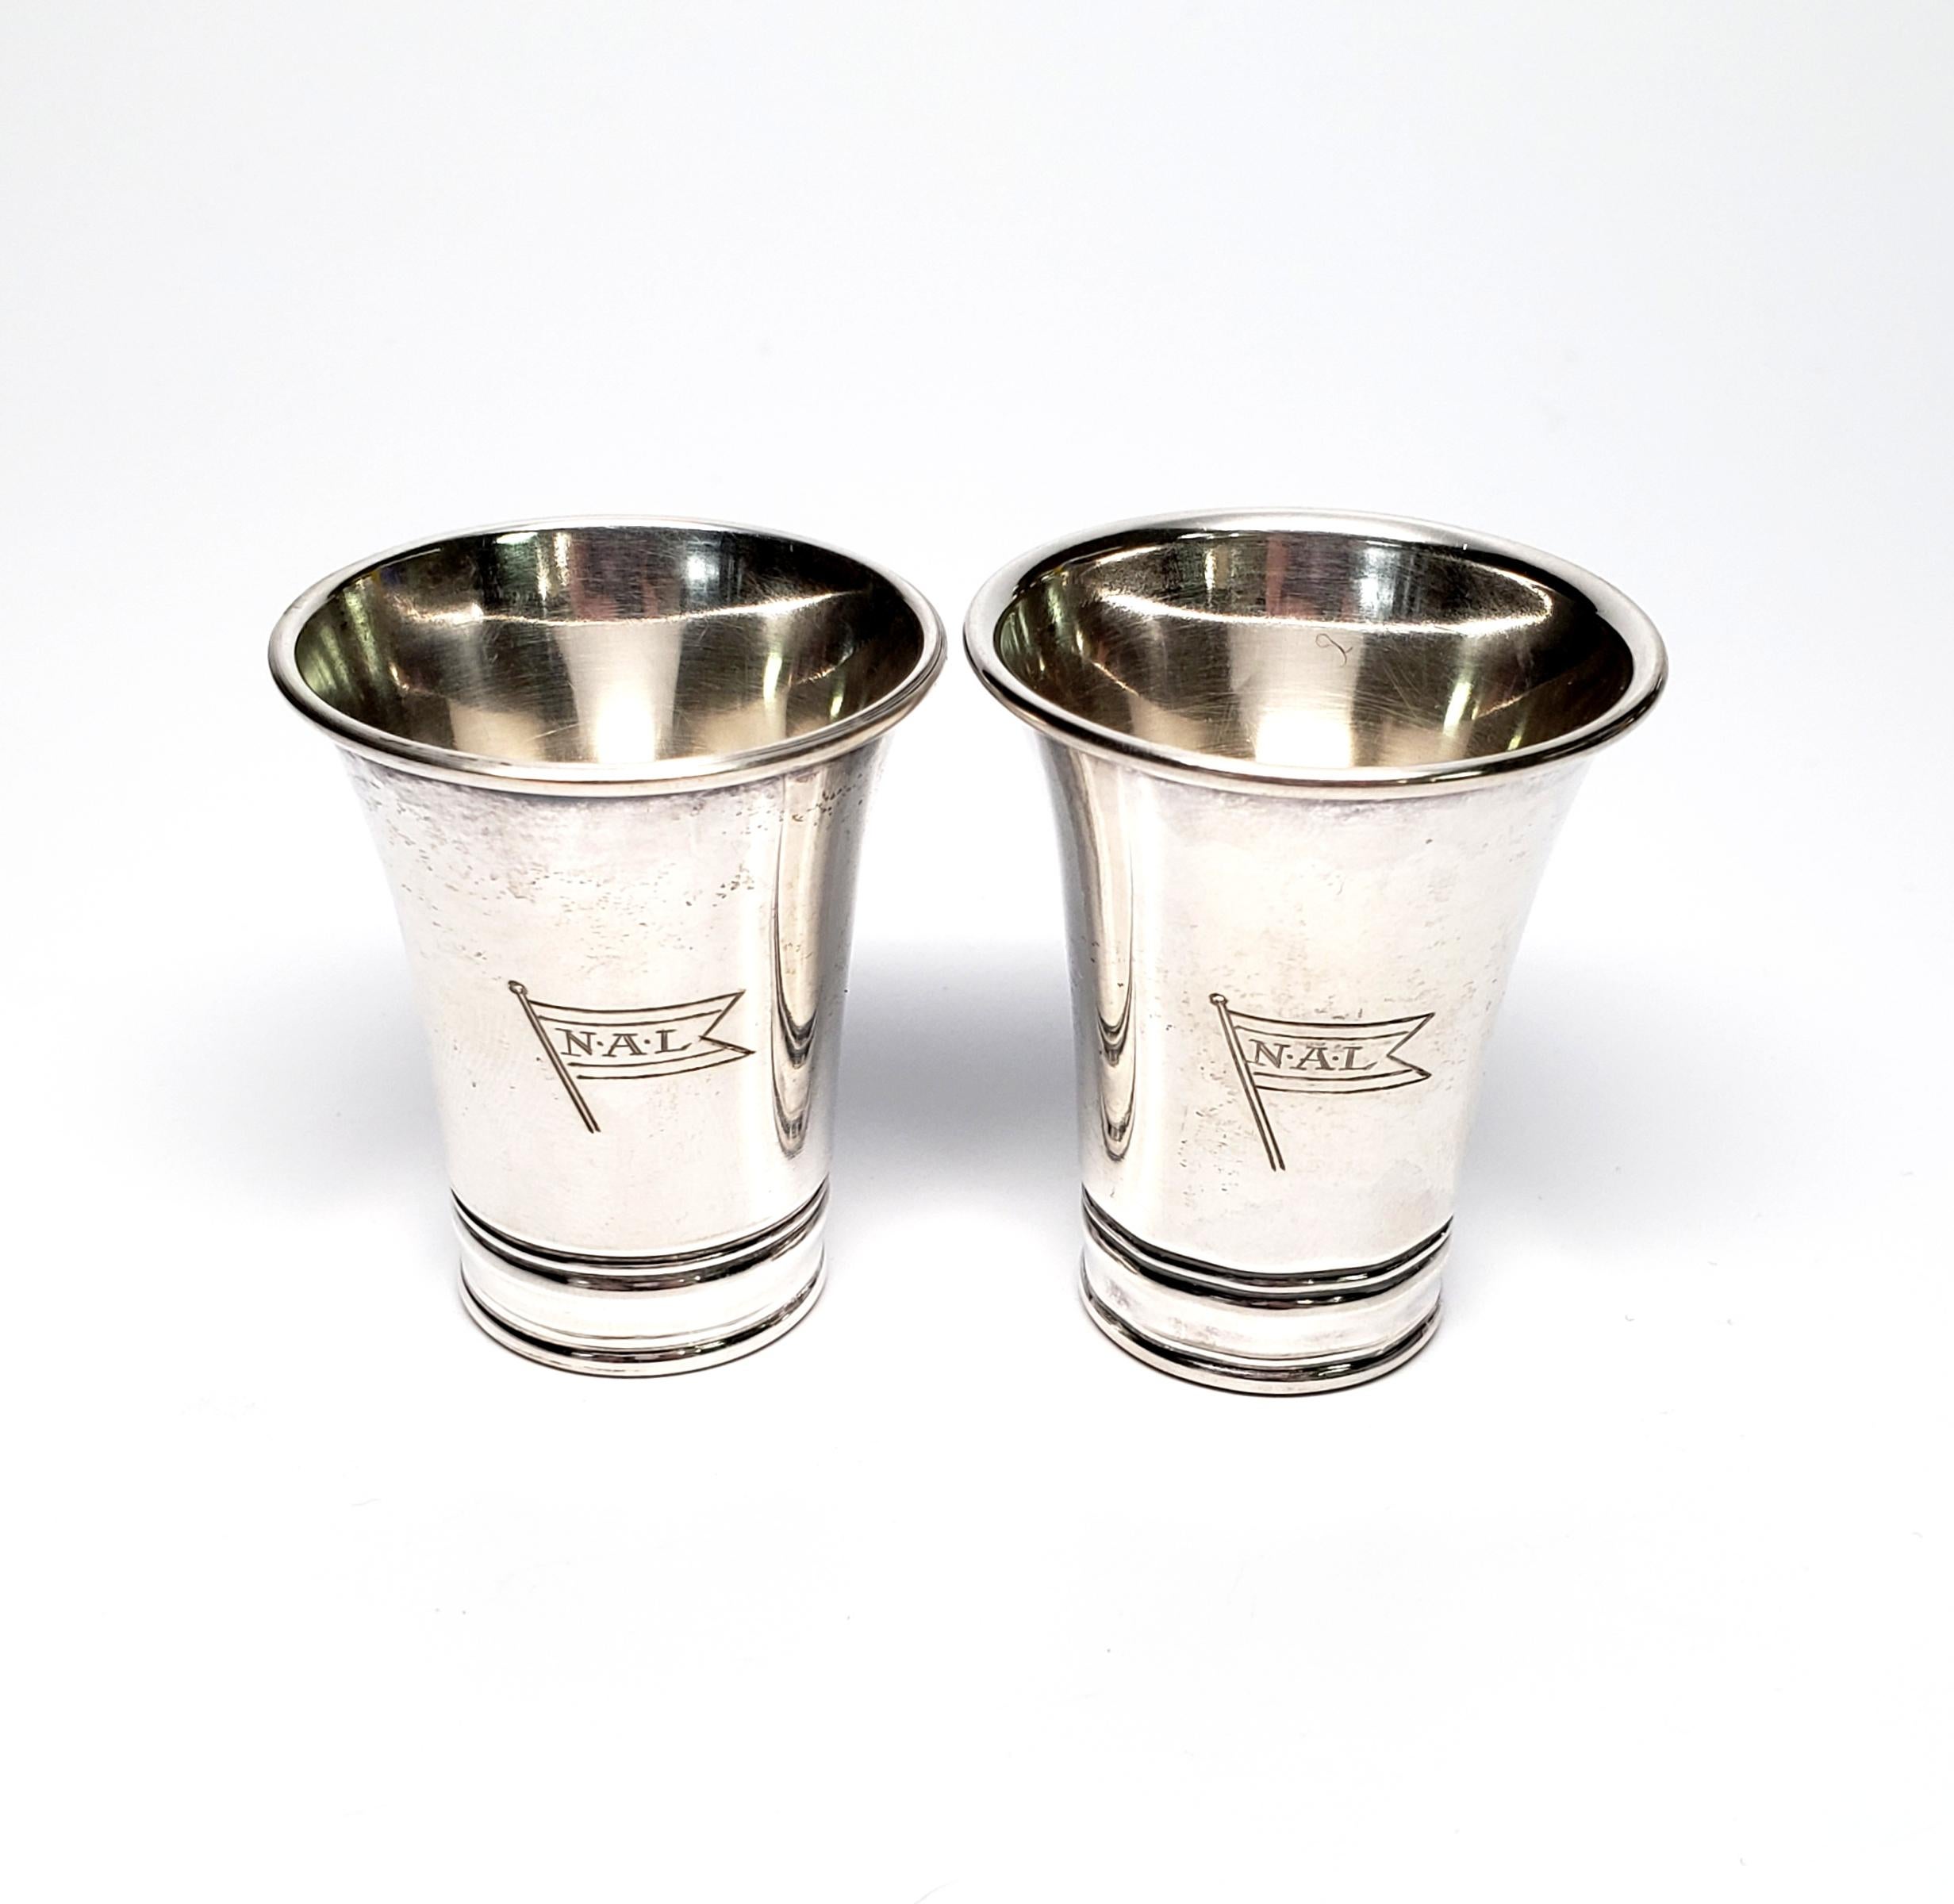 Set of 2 830 silver Norwegian American Line souvenir cups by David Andersen.

These 2 small cups are slightly different sizes and feature the NAL flag etched on each cup.

The smaller cup measures approx 1 5/8